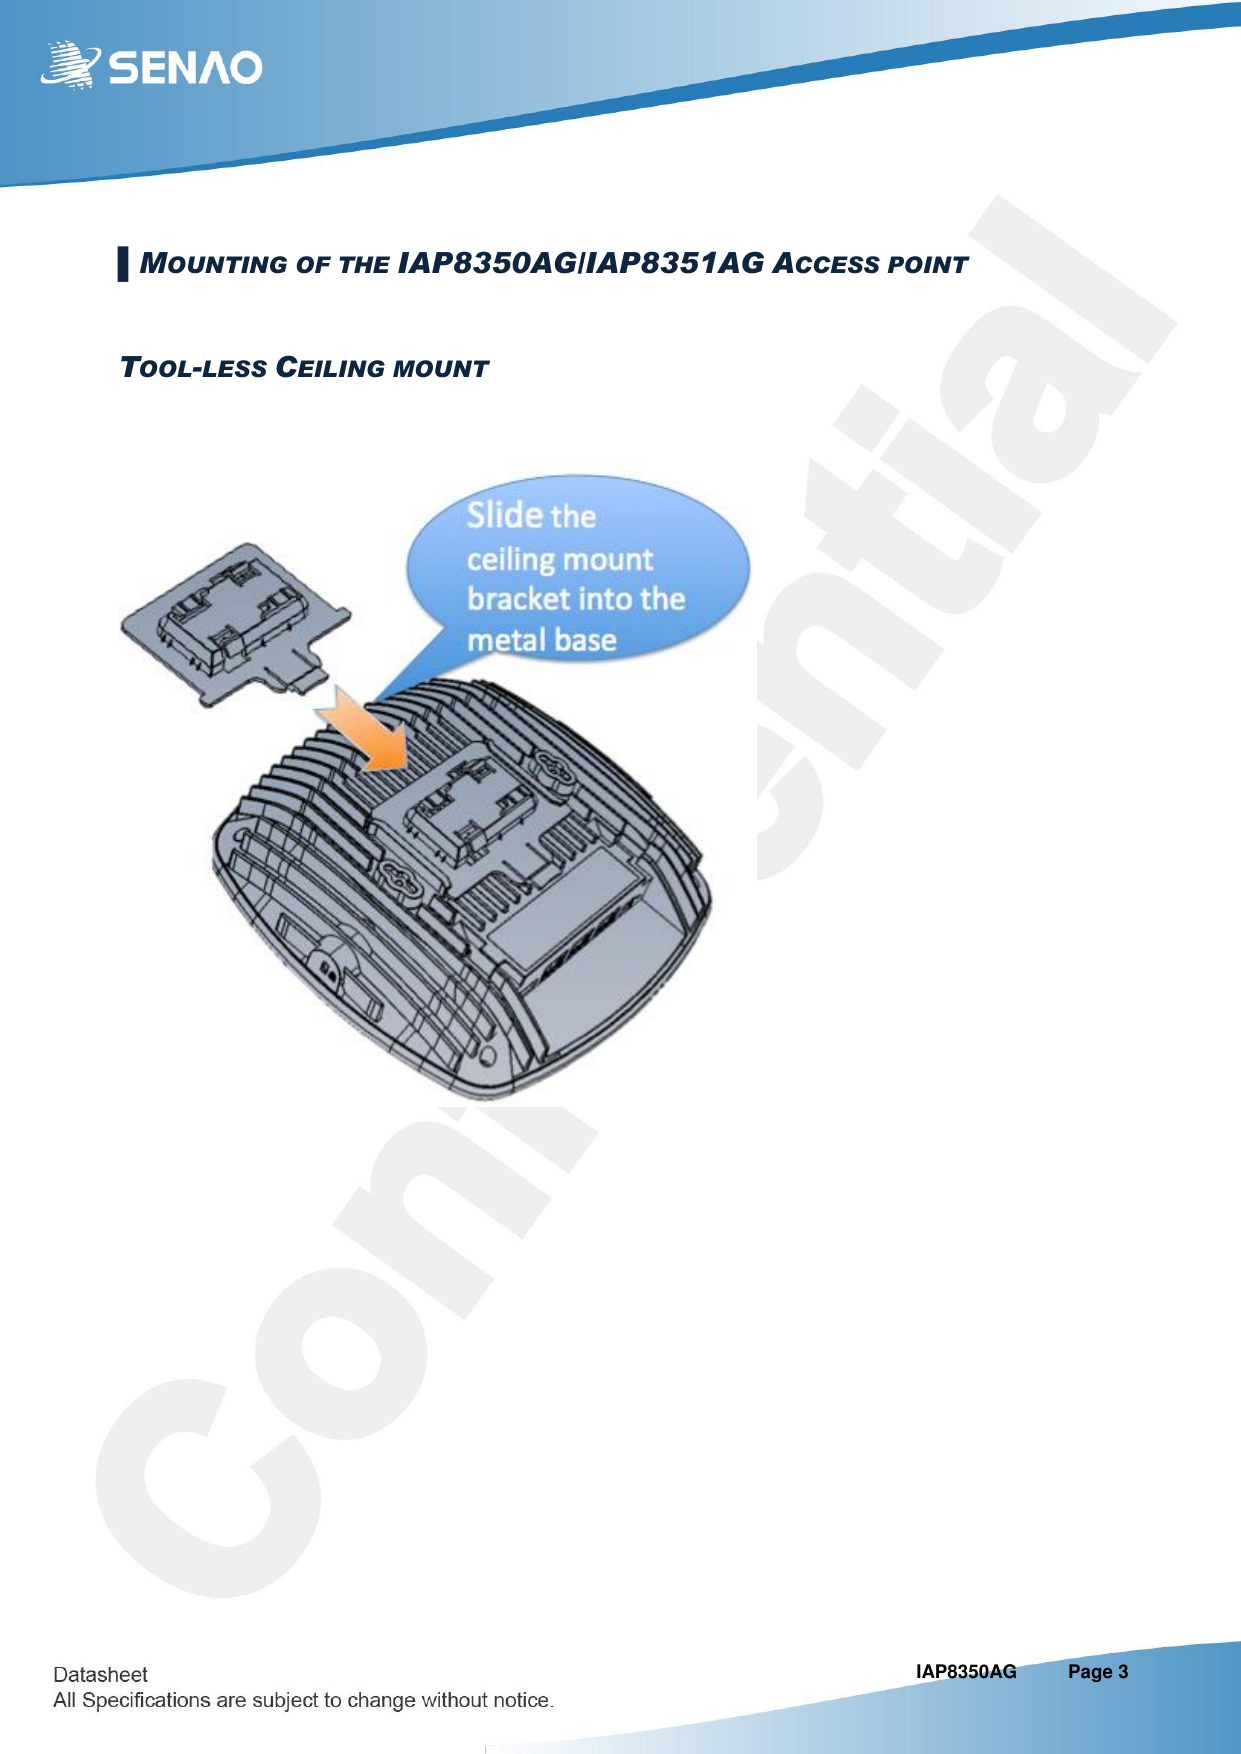                                                                                                                                                                            IAP8350AG   Page 3 ▌MOUNTING OF THE IAP8350AG/IAP8351AG ACCESS POINT TOOL-LESS CEILING MOUNT       